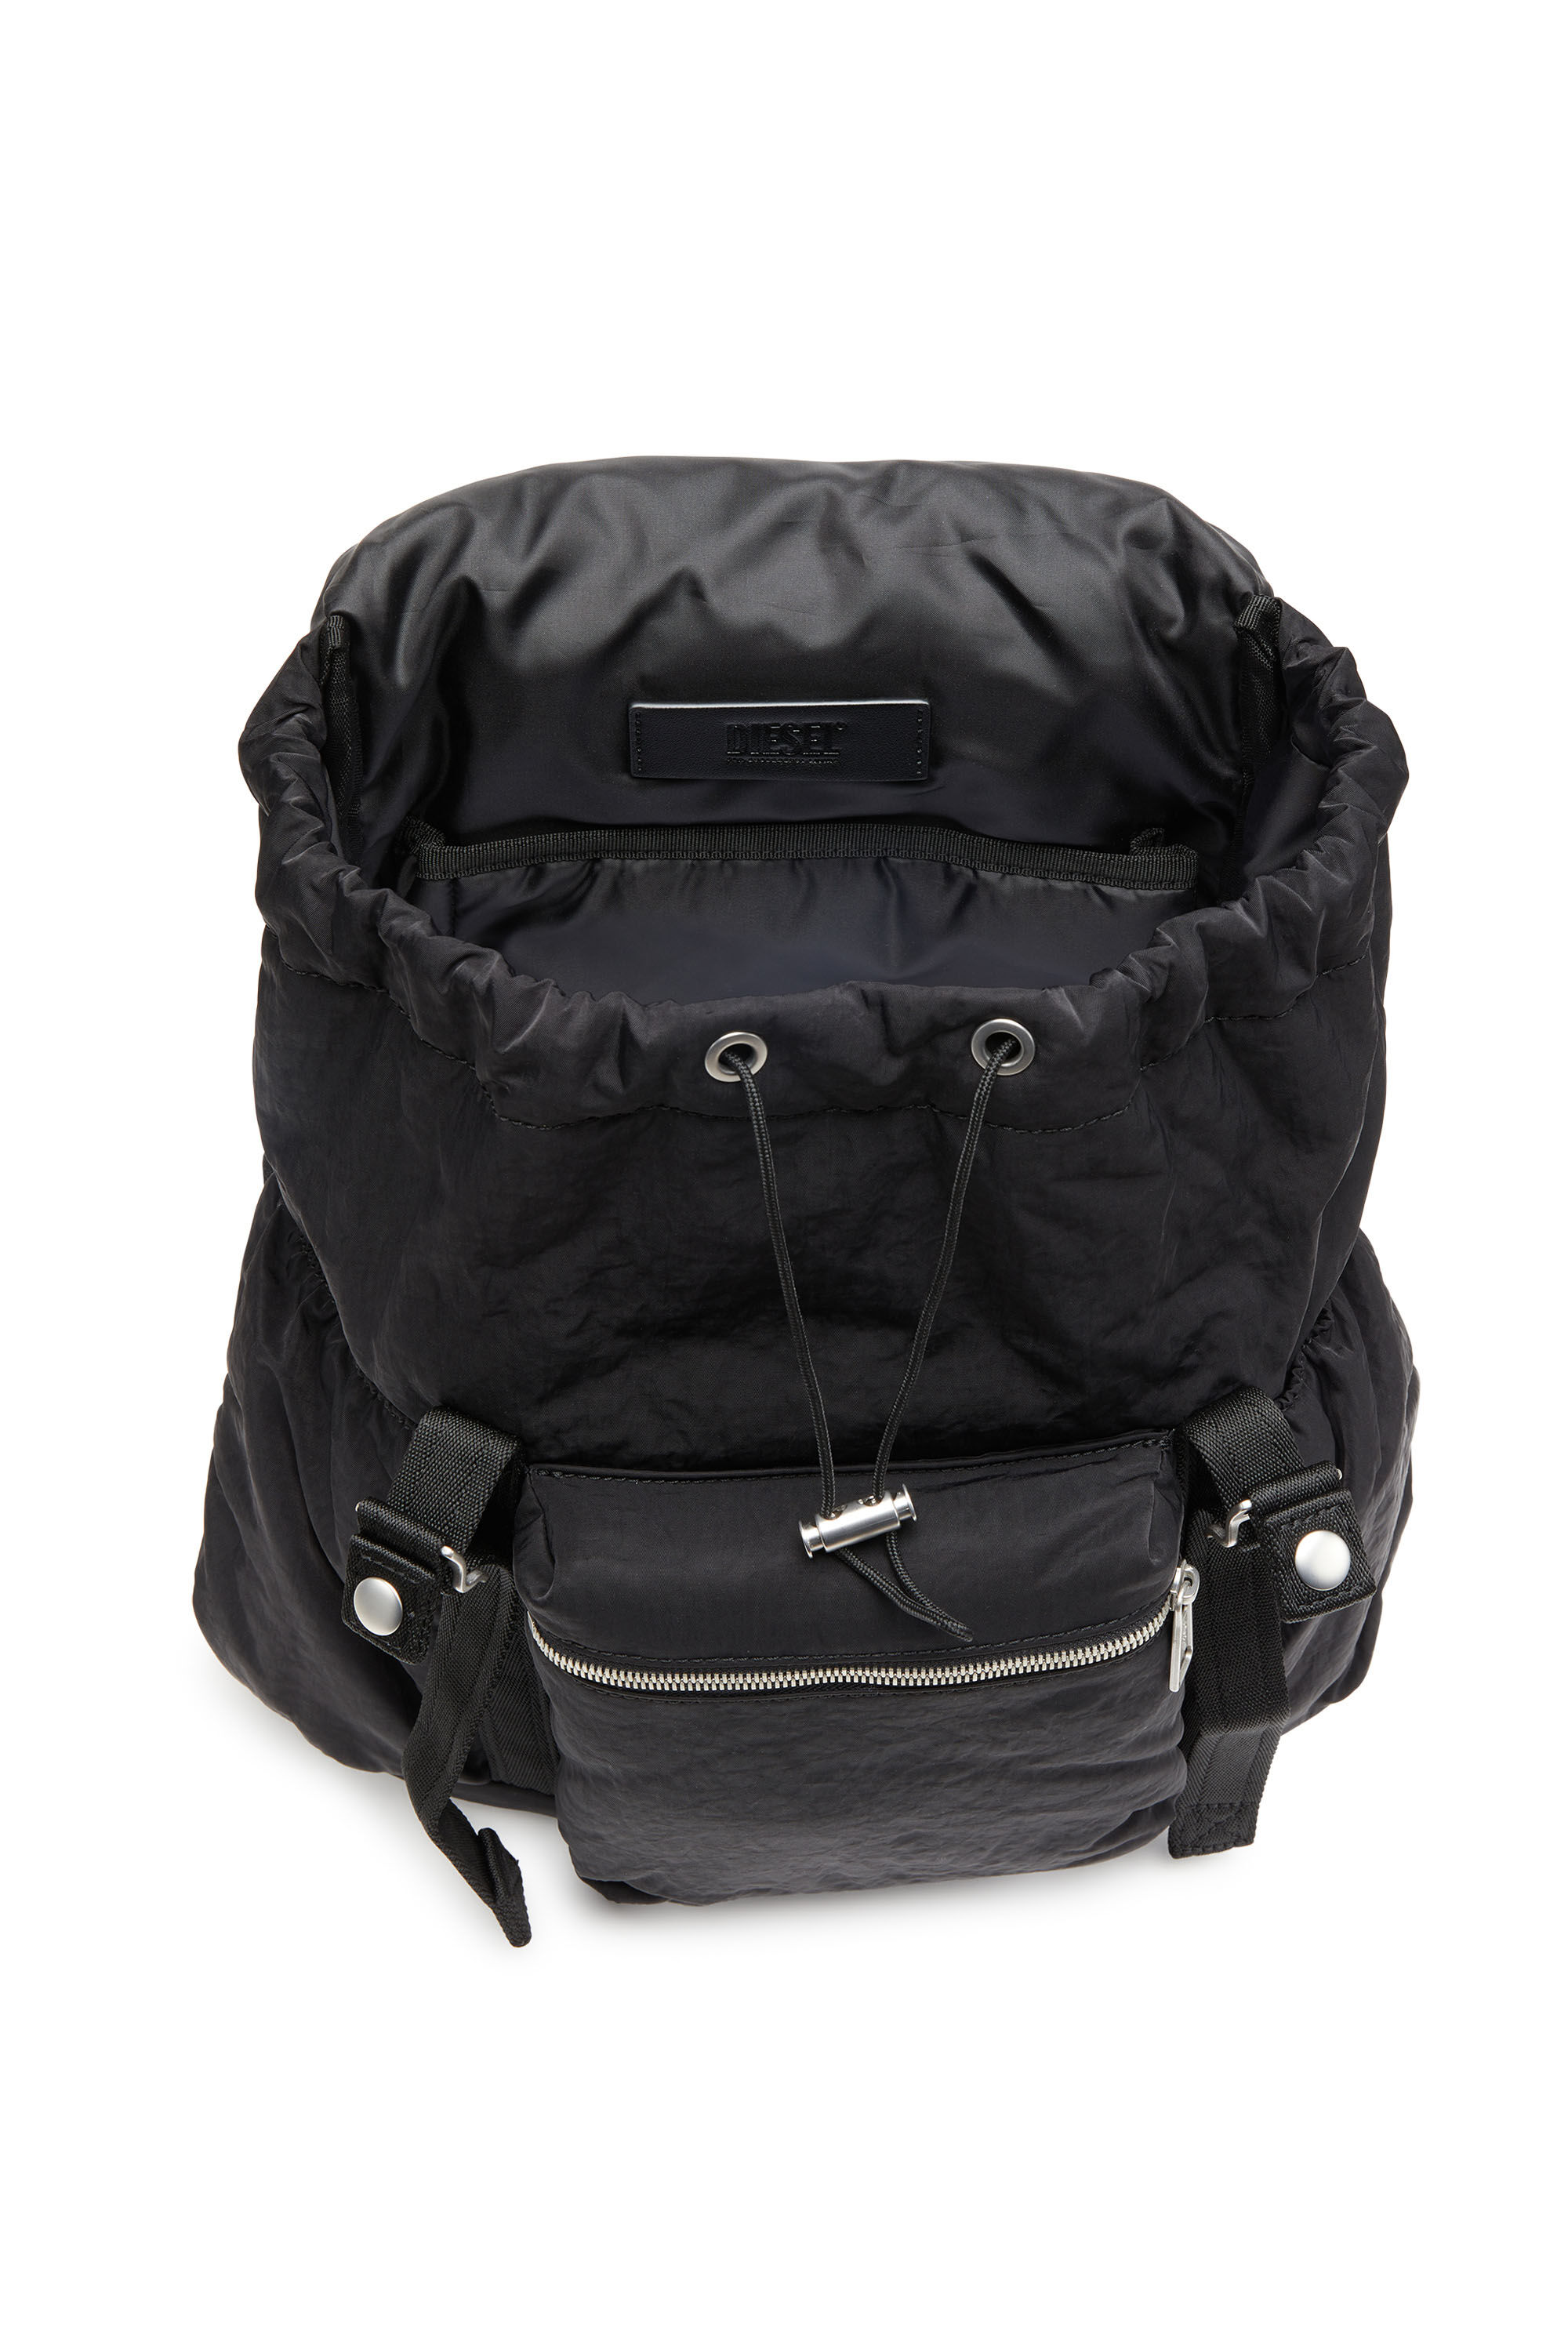 LOGOS BACKPACK L Logos L-Large backpack in recycled nylon 